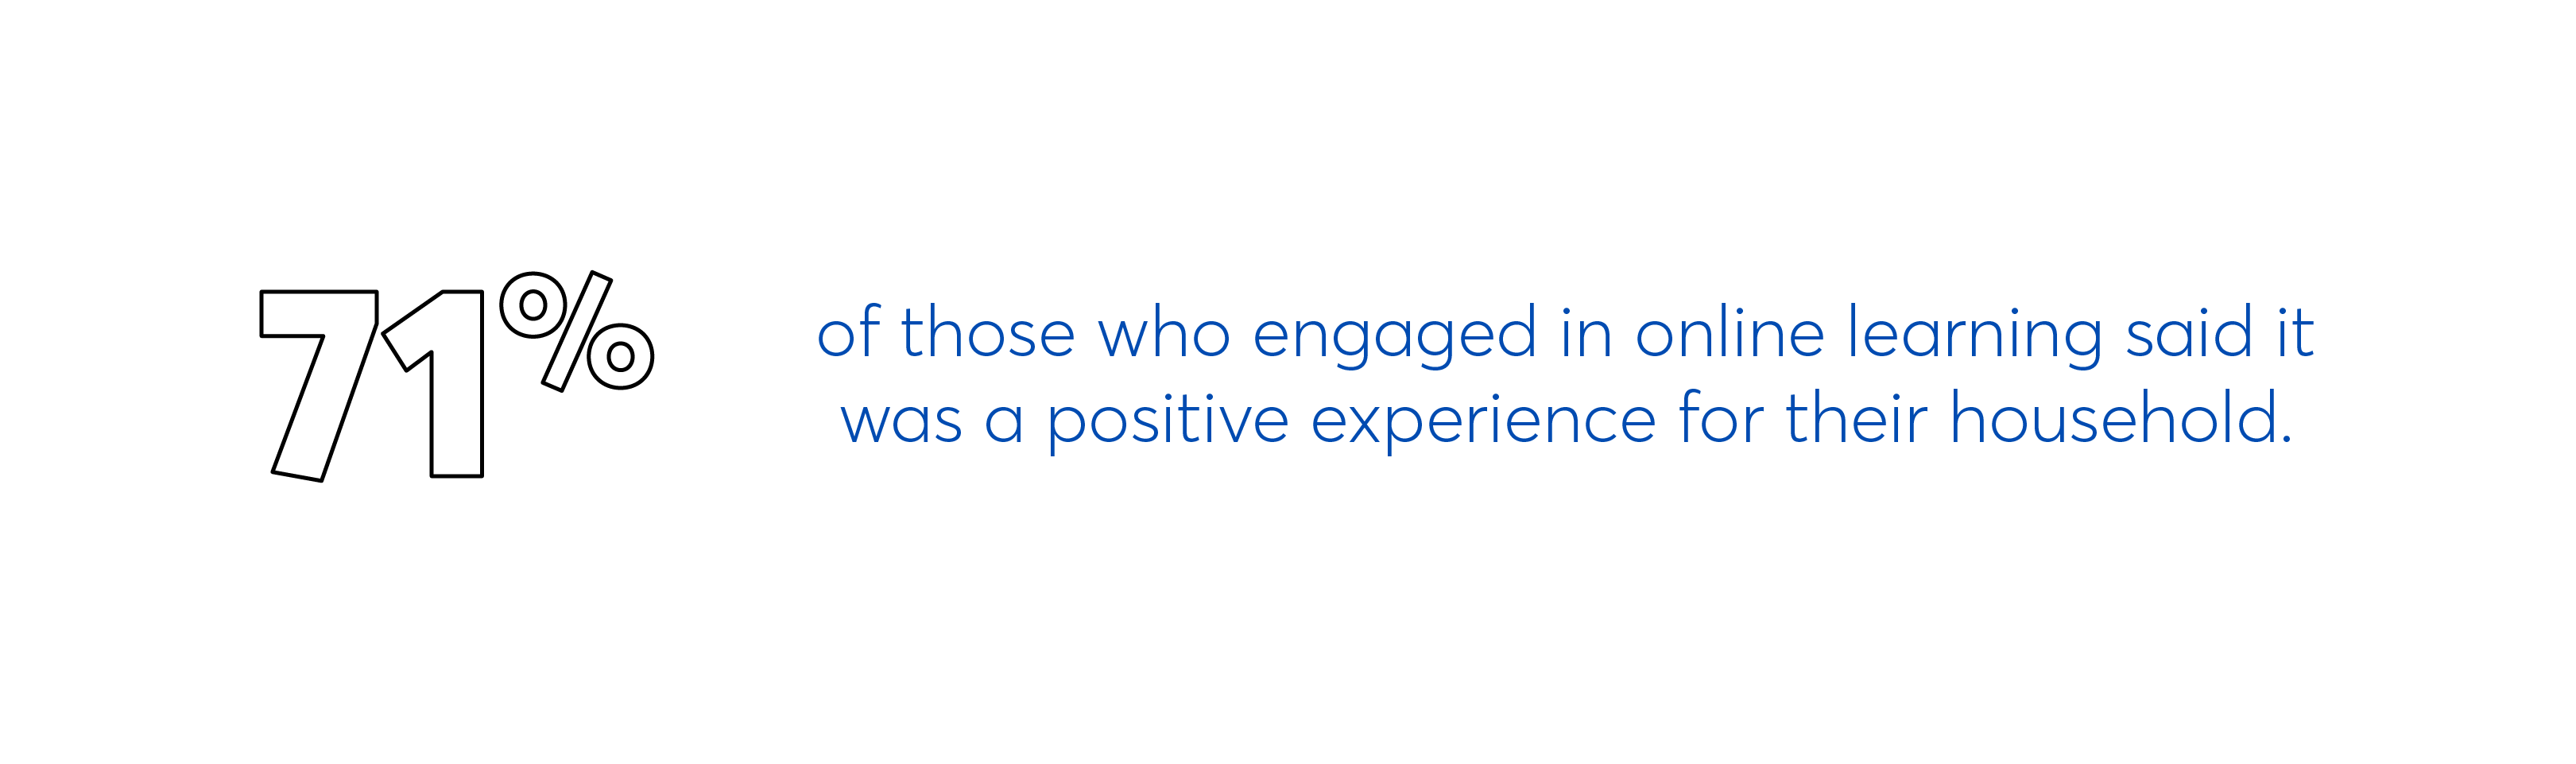 People who engaged in online learning had a generally positive experience